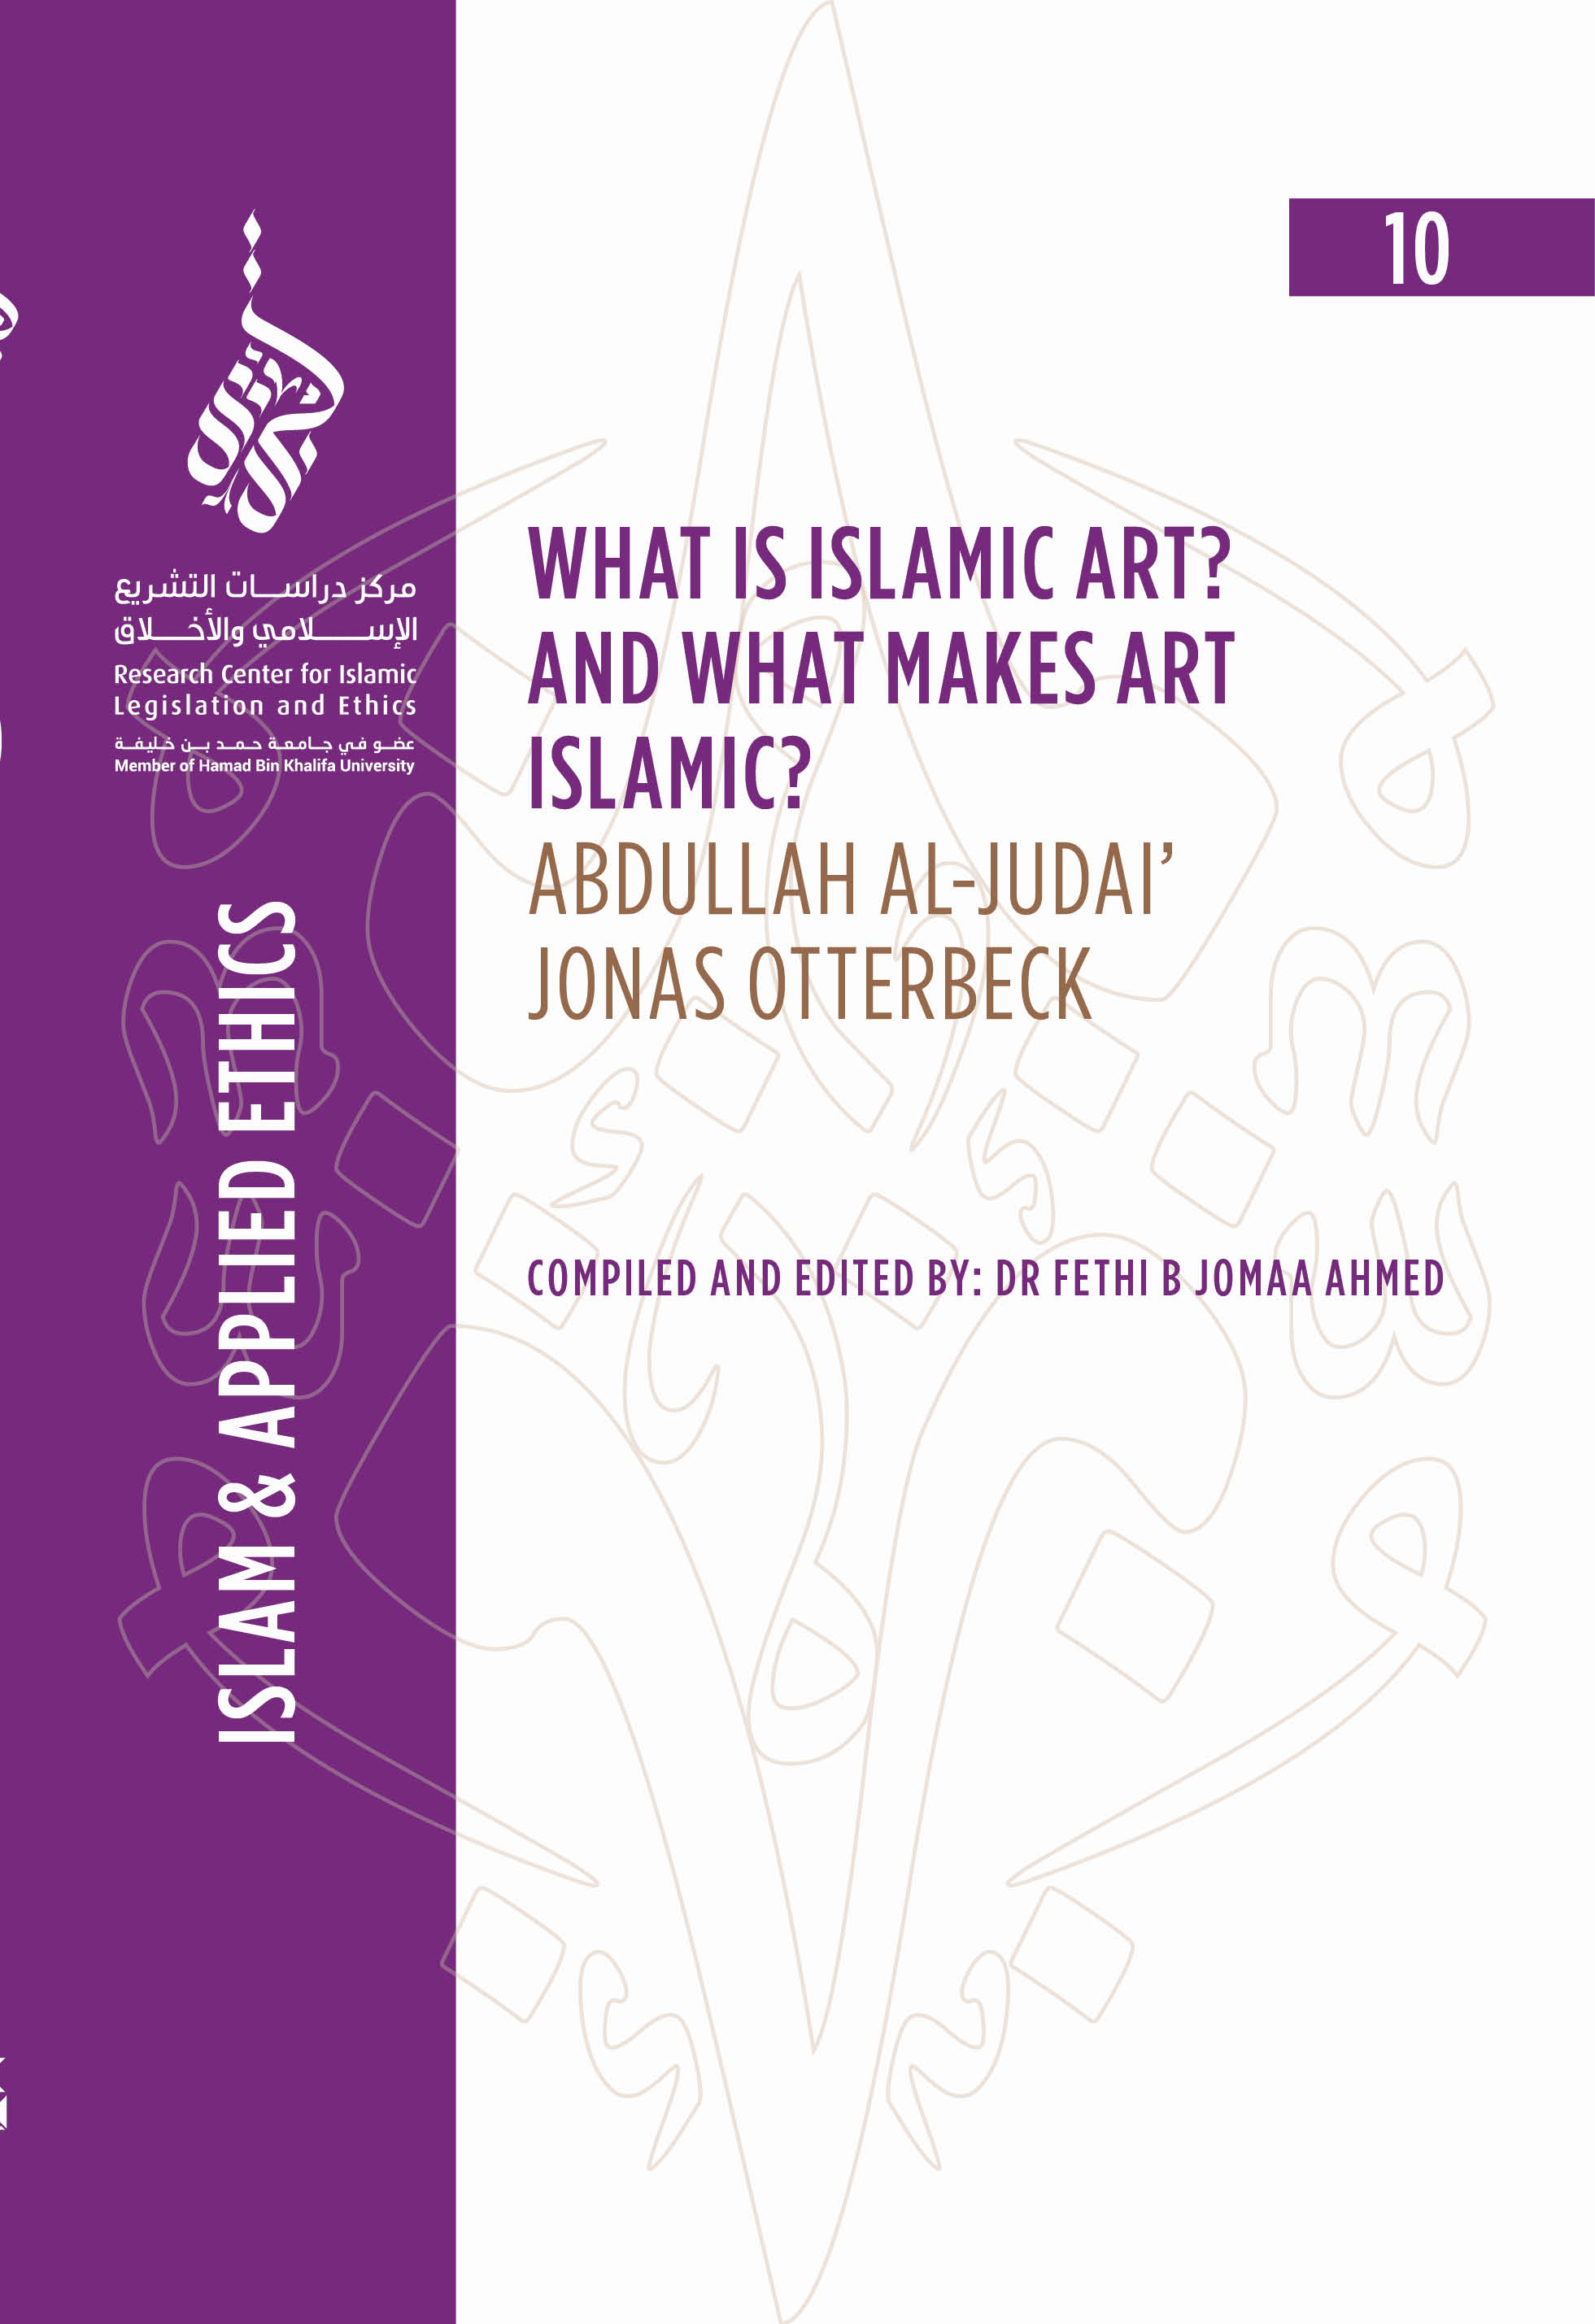 What is Islamic Art? And What Makes Art Islamic?